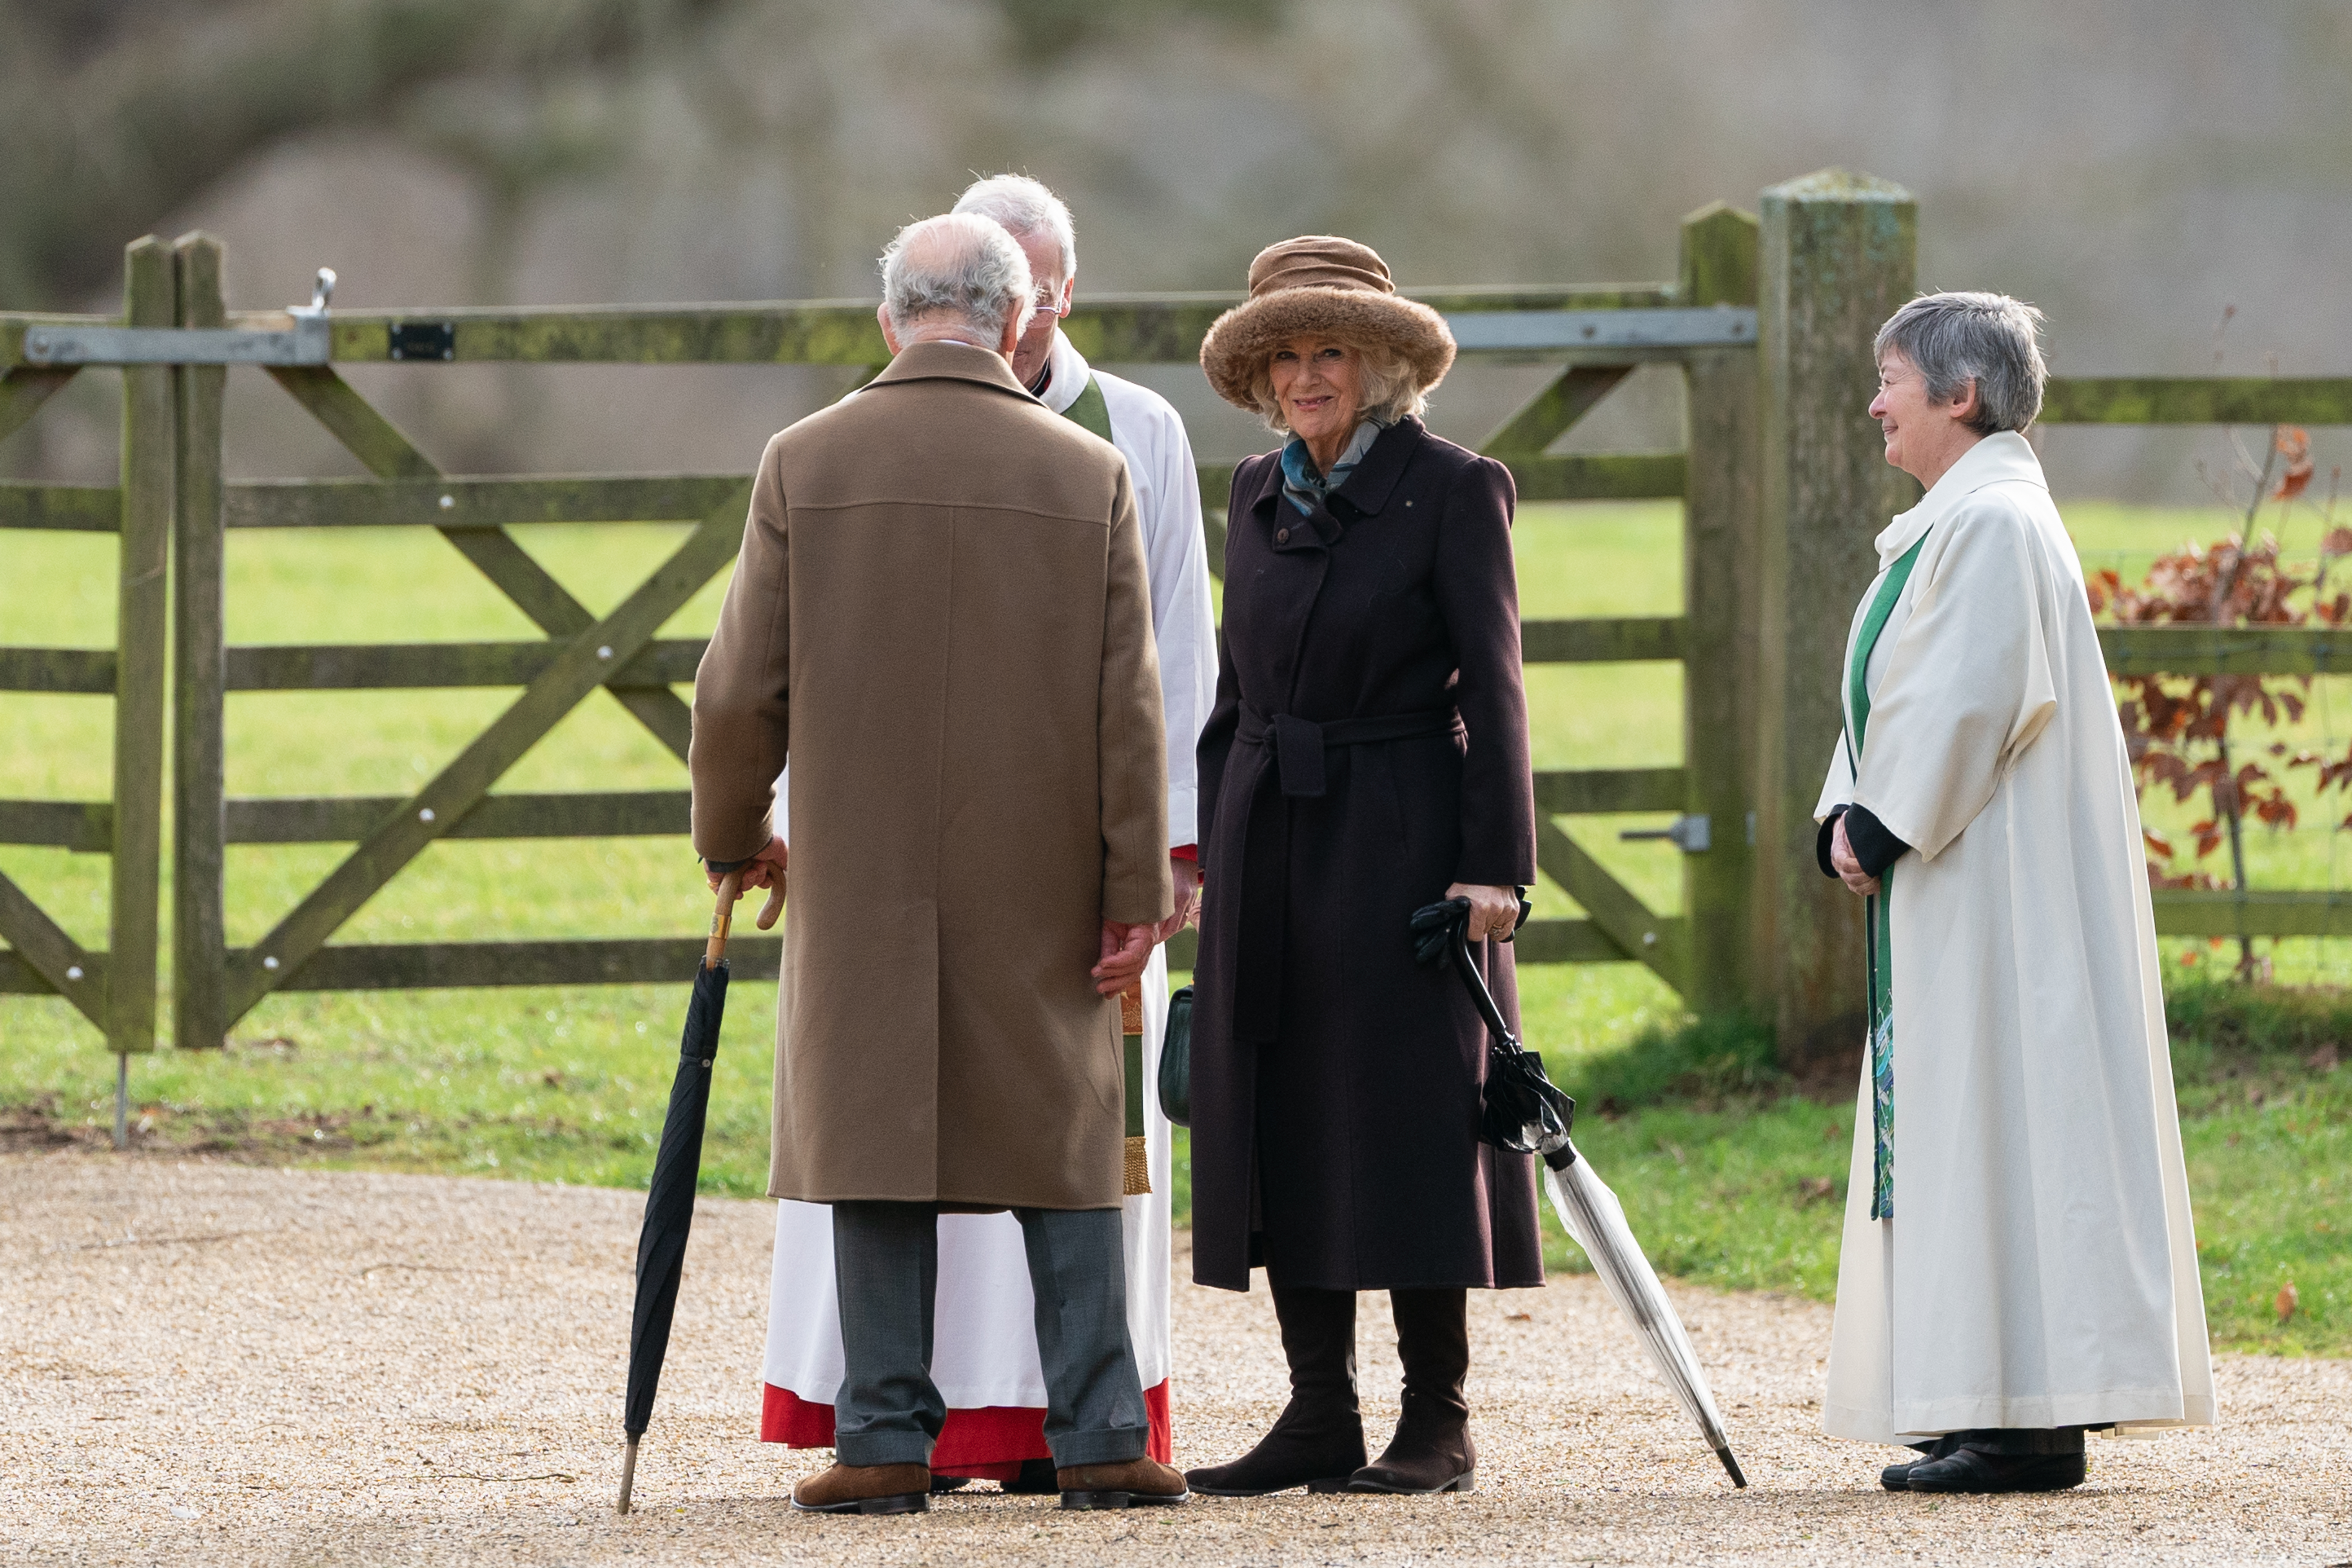 King Charles III, Queen Camilla, Reverend Canon Dr Paul Williams and another member of the church at Sunday church service at St Mary Magdalene Church in Sandringham, Norfolk on February 4, 2024 | Source: Getty Images